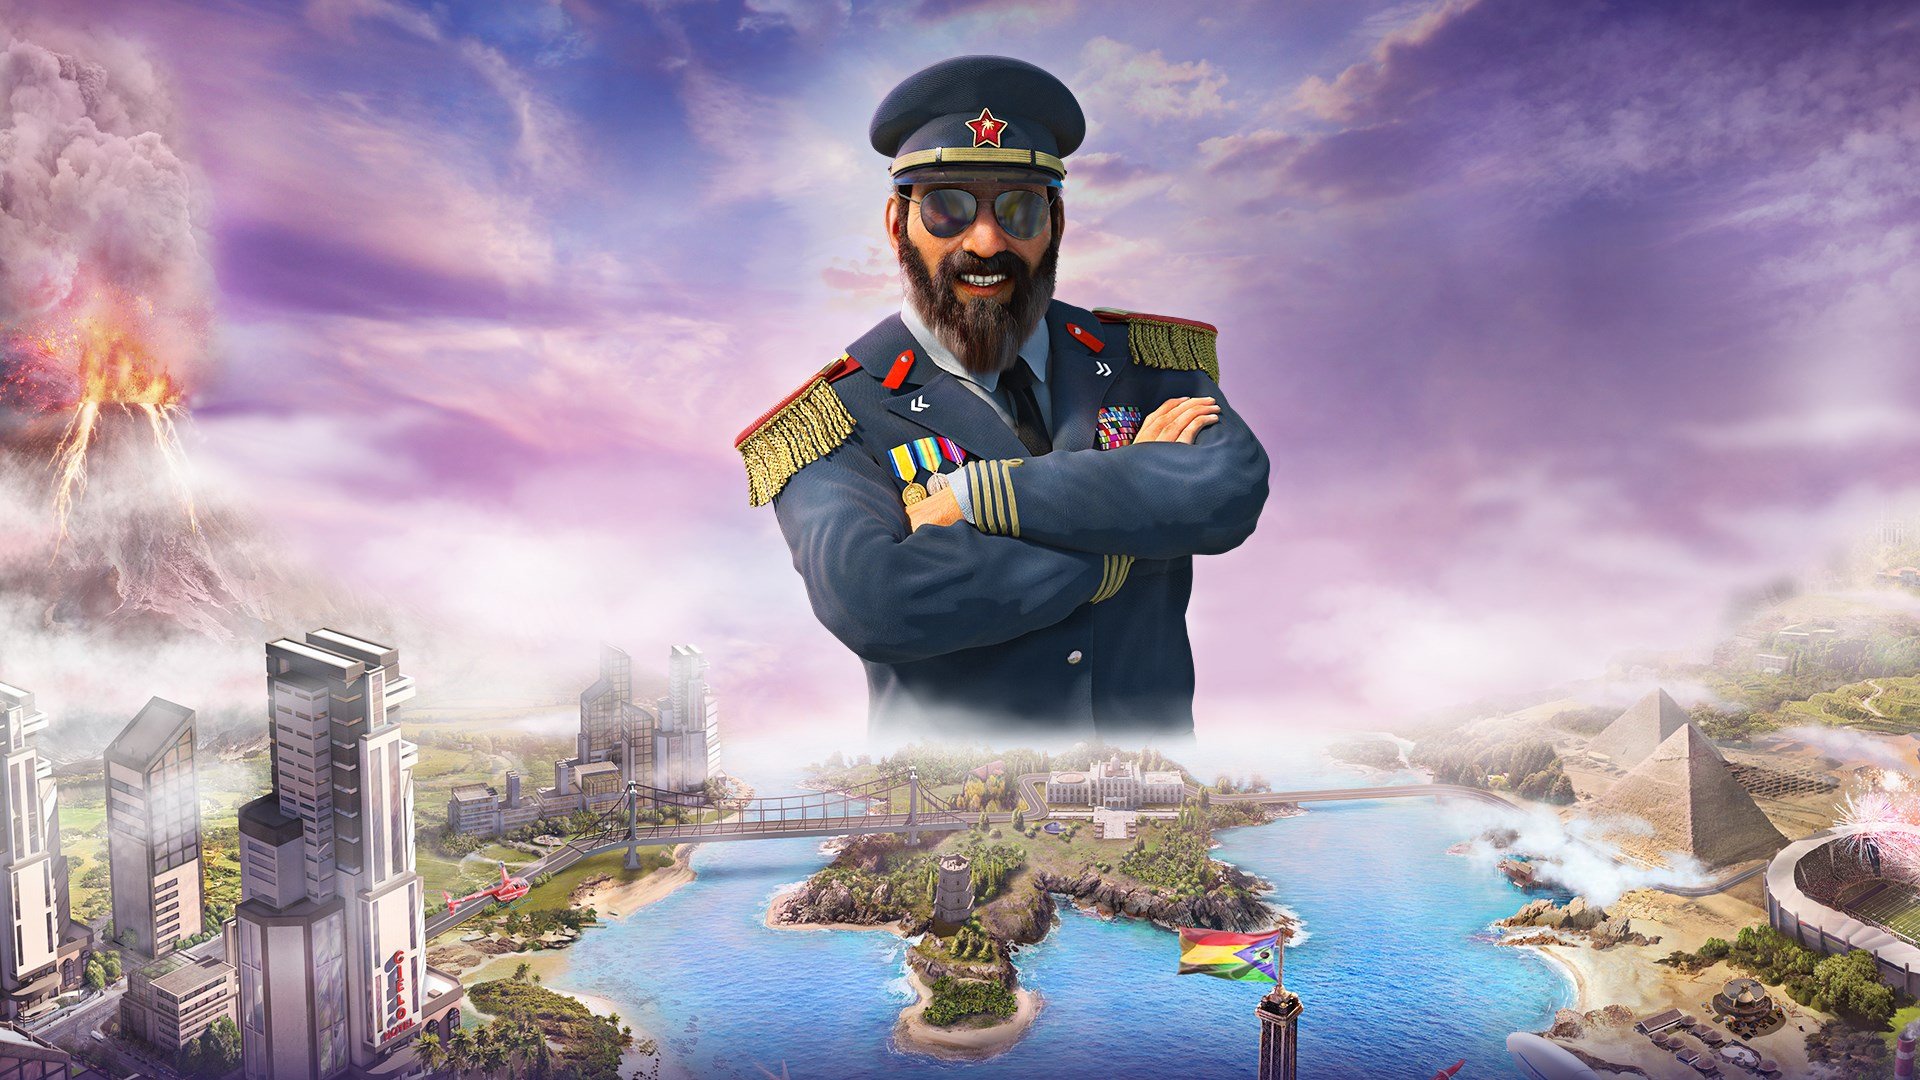 Tropico 6 (Game Preview) cover image